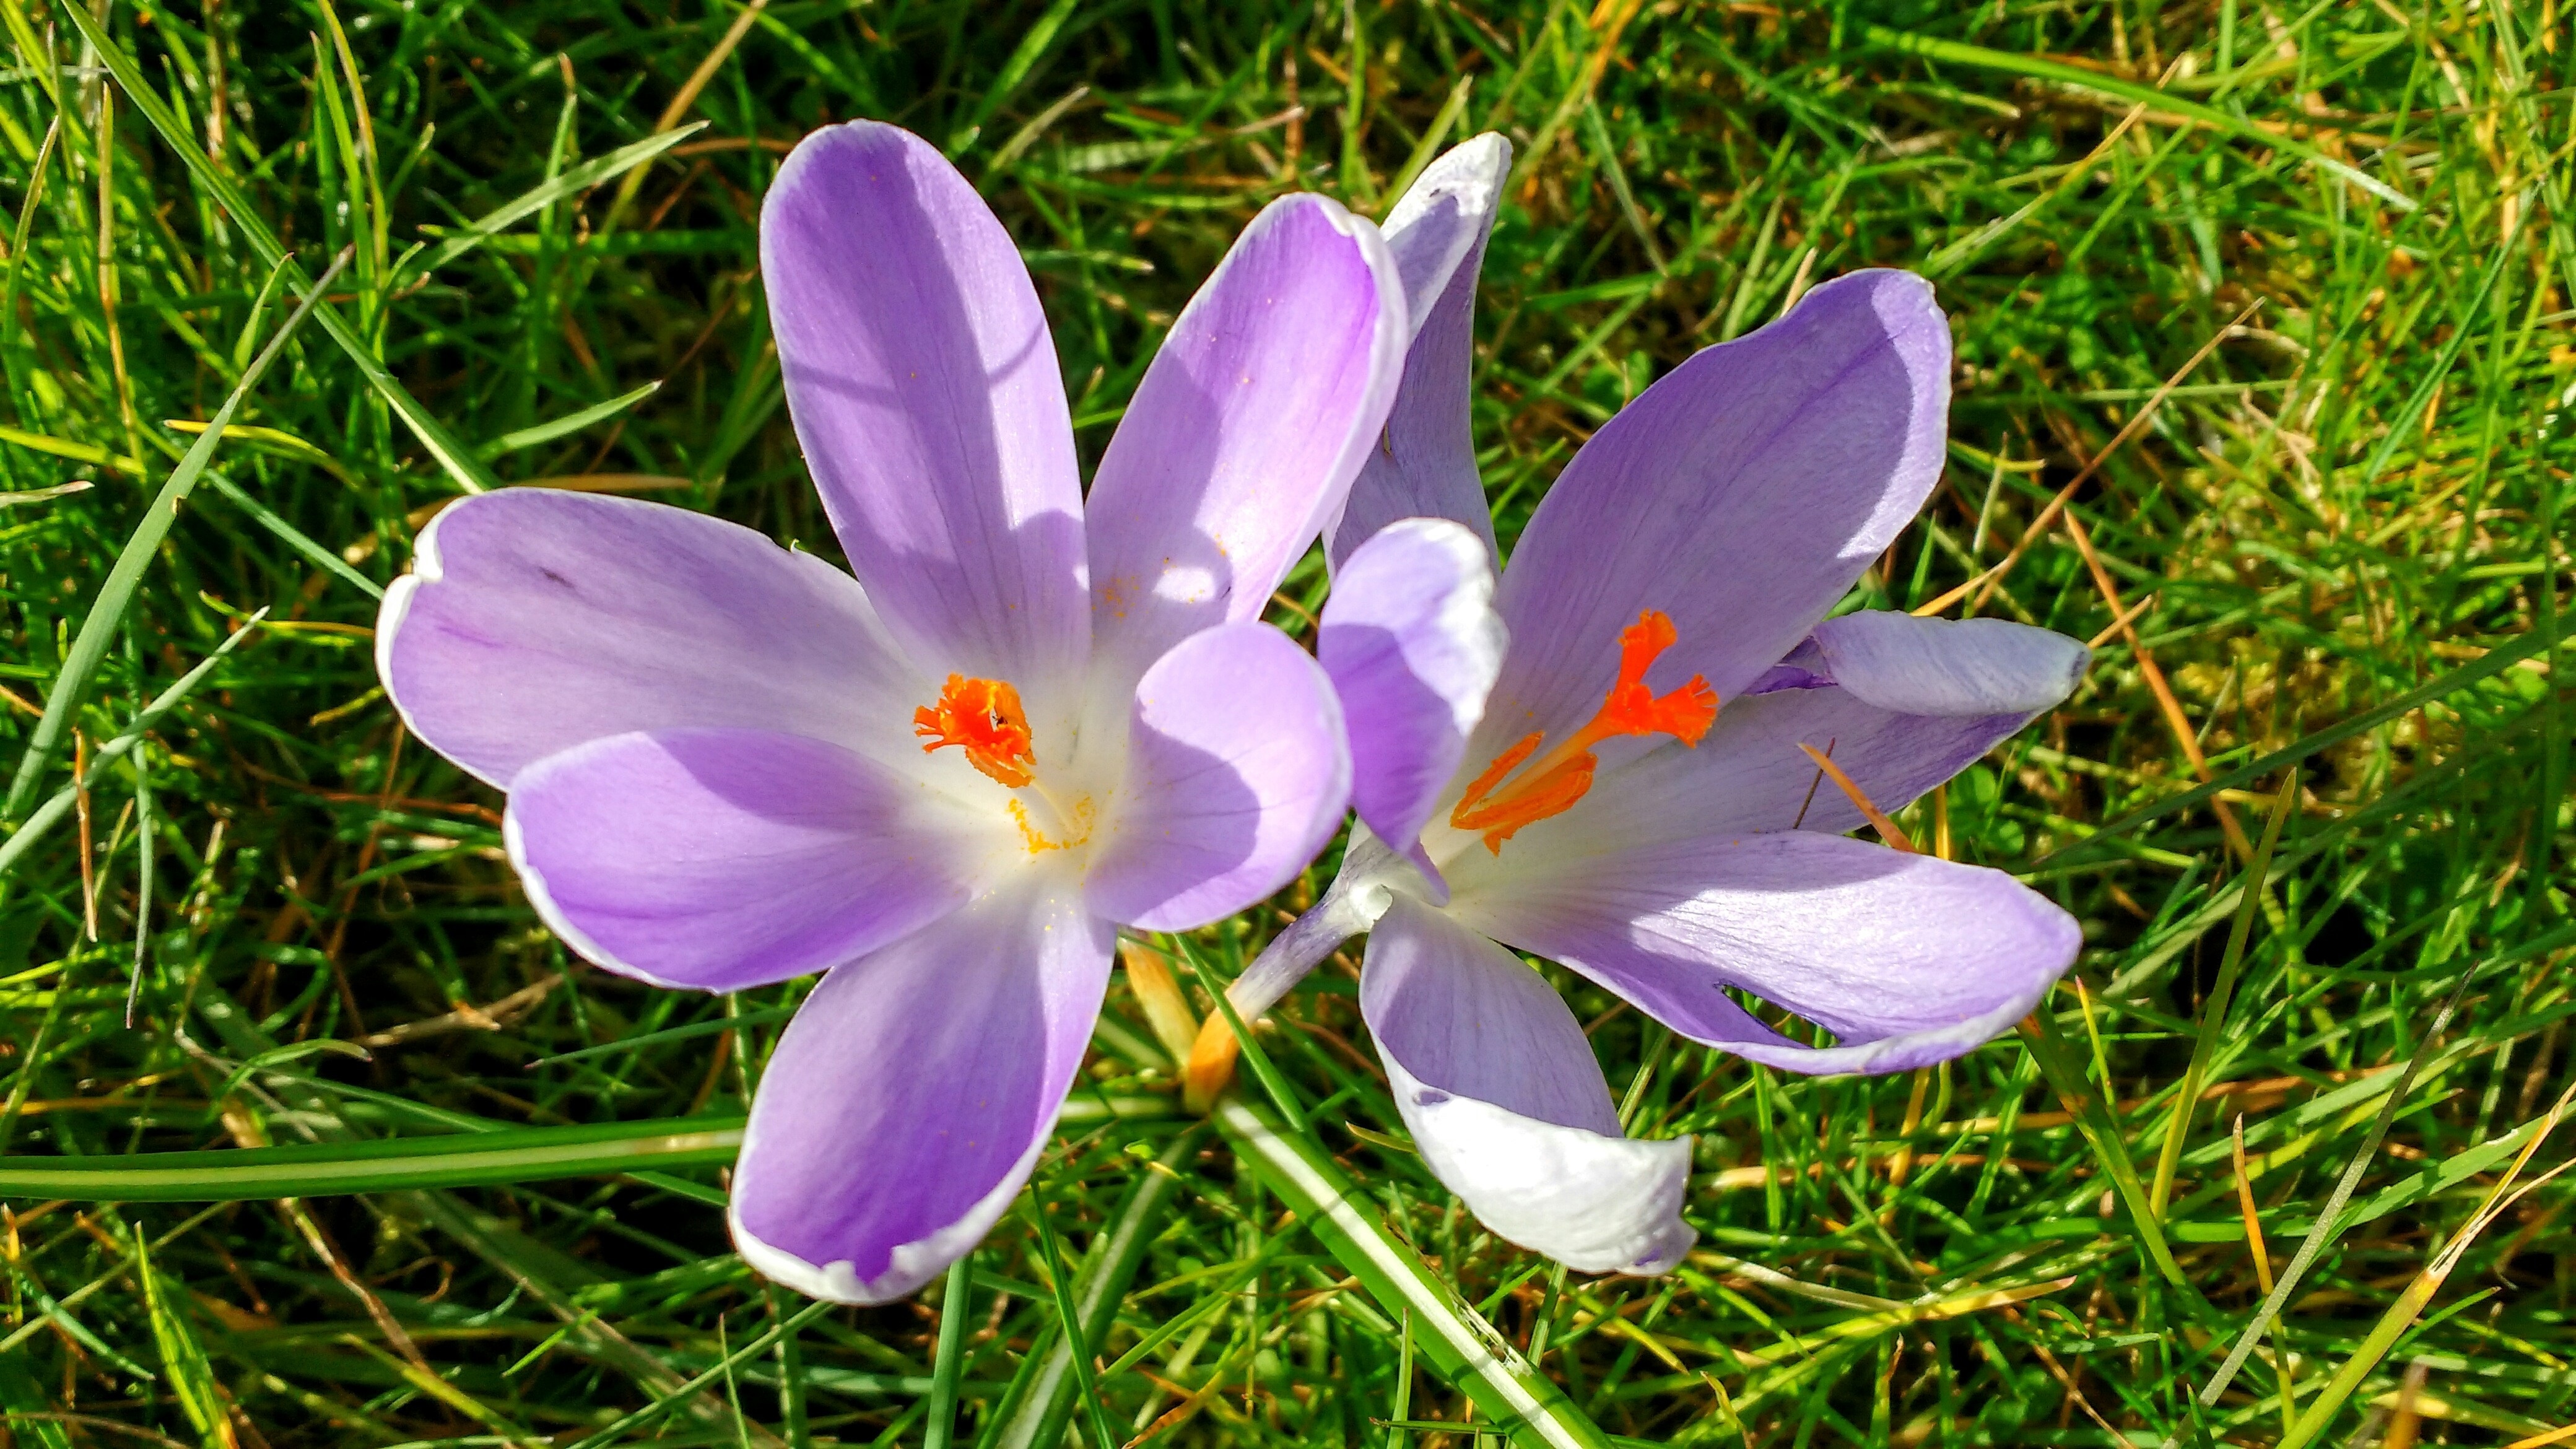 two purple and white petaled flowers